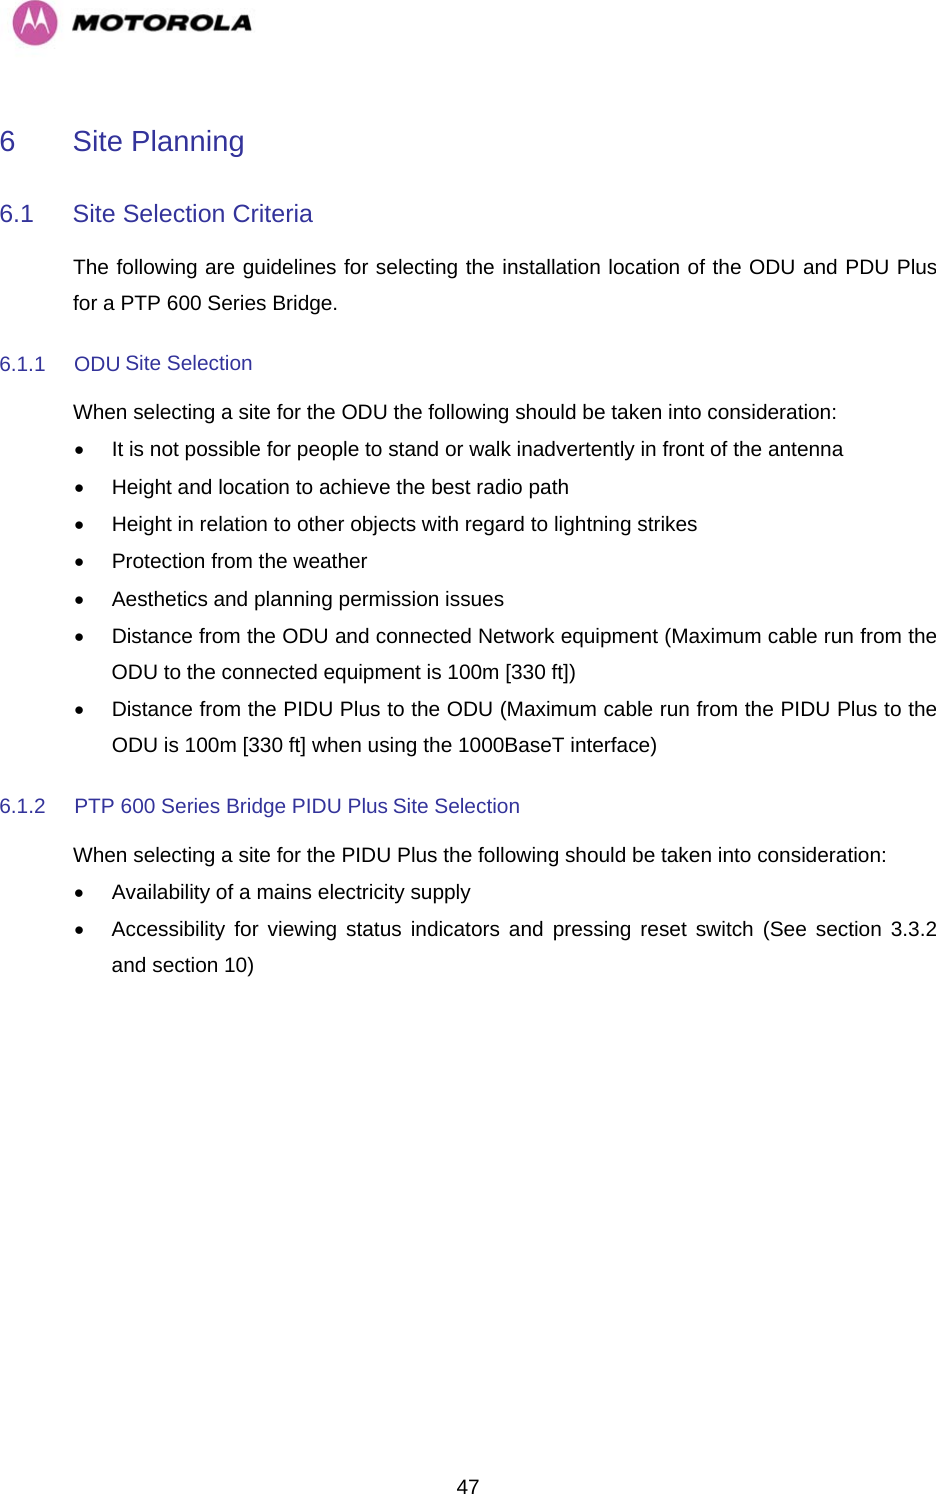   476  Site Planning  6.1  Site Selection Criteria  The following are guidelines for selecting the installation location of the ODU and PDU Plus for a PTP 600 Series Bridge.  6.1.1 ODU Site Selection  When selecting a site for the ODU the following should be taken into consideration:  •  It is not possible for people to stand or walk inadvertently in front of the antenna  •  Height and location to achieve the best radio path  •  Height in relation to other objects with regard to lightning strikes  •  Protection from the weather  •  Aesthetics and planning permission issues  •  Distance from the ODU and connected Network equipment (Maximum cable run from the ODU to the connected equipment is 100m [330 ft])  •  Distance from the PIDU Plus to the ODU (Maximum cable run from the PIDU Plus to the ODU is 100m [330 ft] when using the 1000BaseT interface)  6.1.2  PTP 600 Series Bridge PIDU Plus Site Selection  When selecting a site for the PIDU Plus the following should be taken into consideration:  •  Availability of a mains electricity supply  •  Accessibility for viewing status indicators and pressing reset switch (See section 3.3.2 and section 10)    